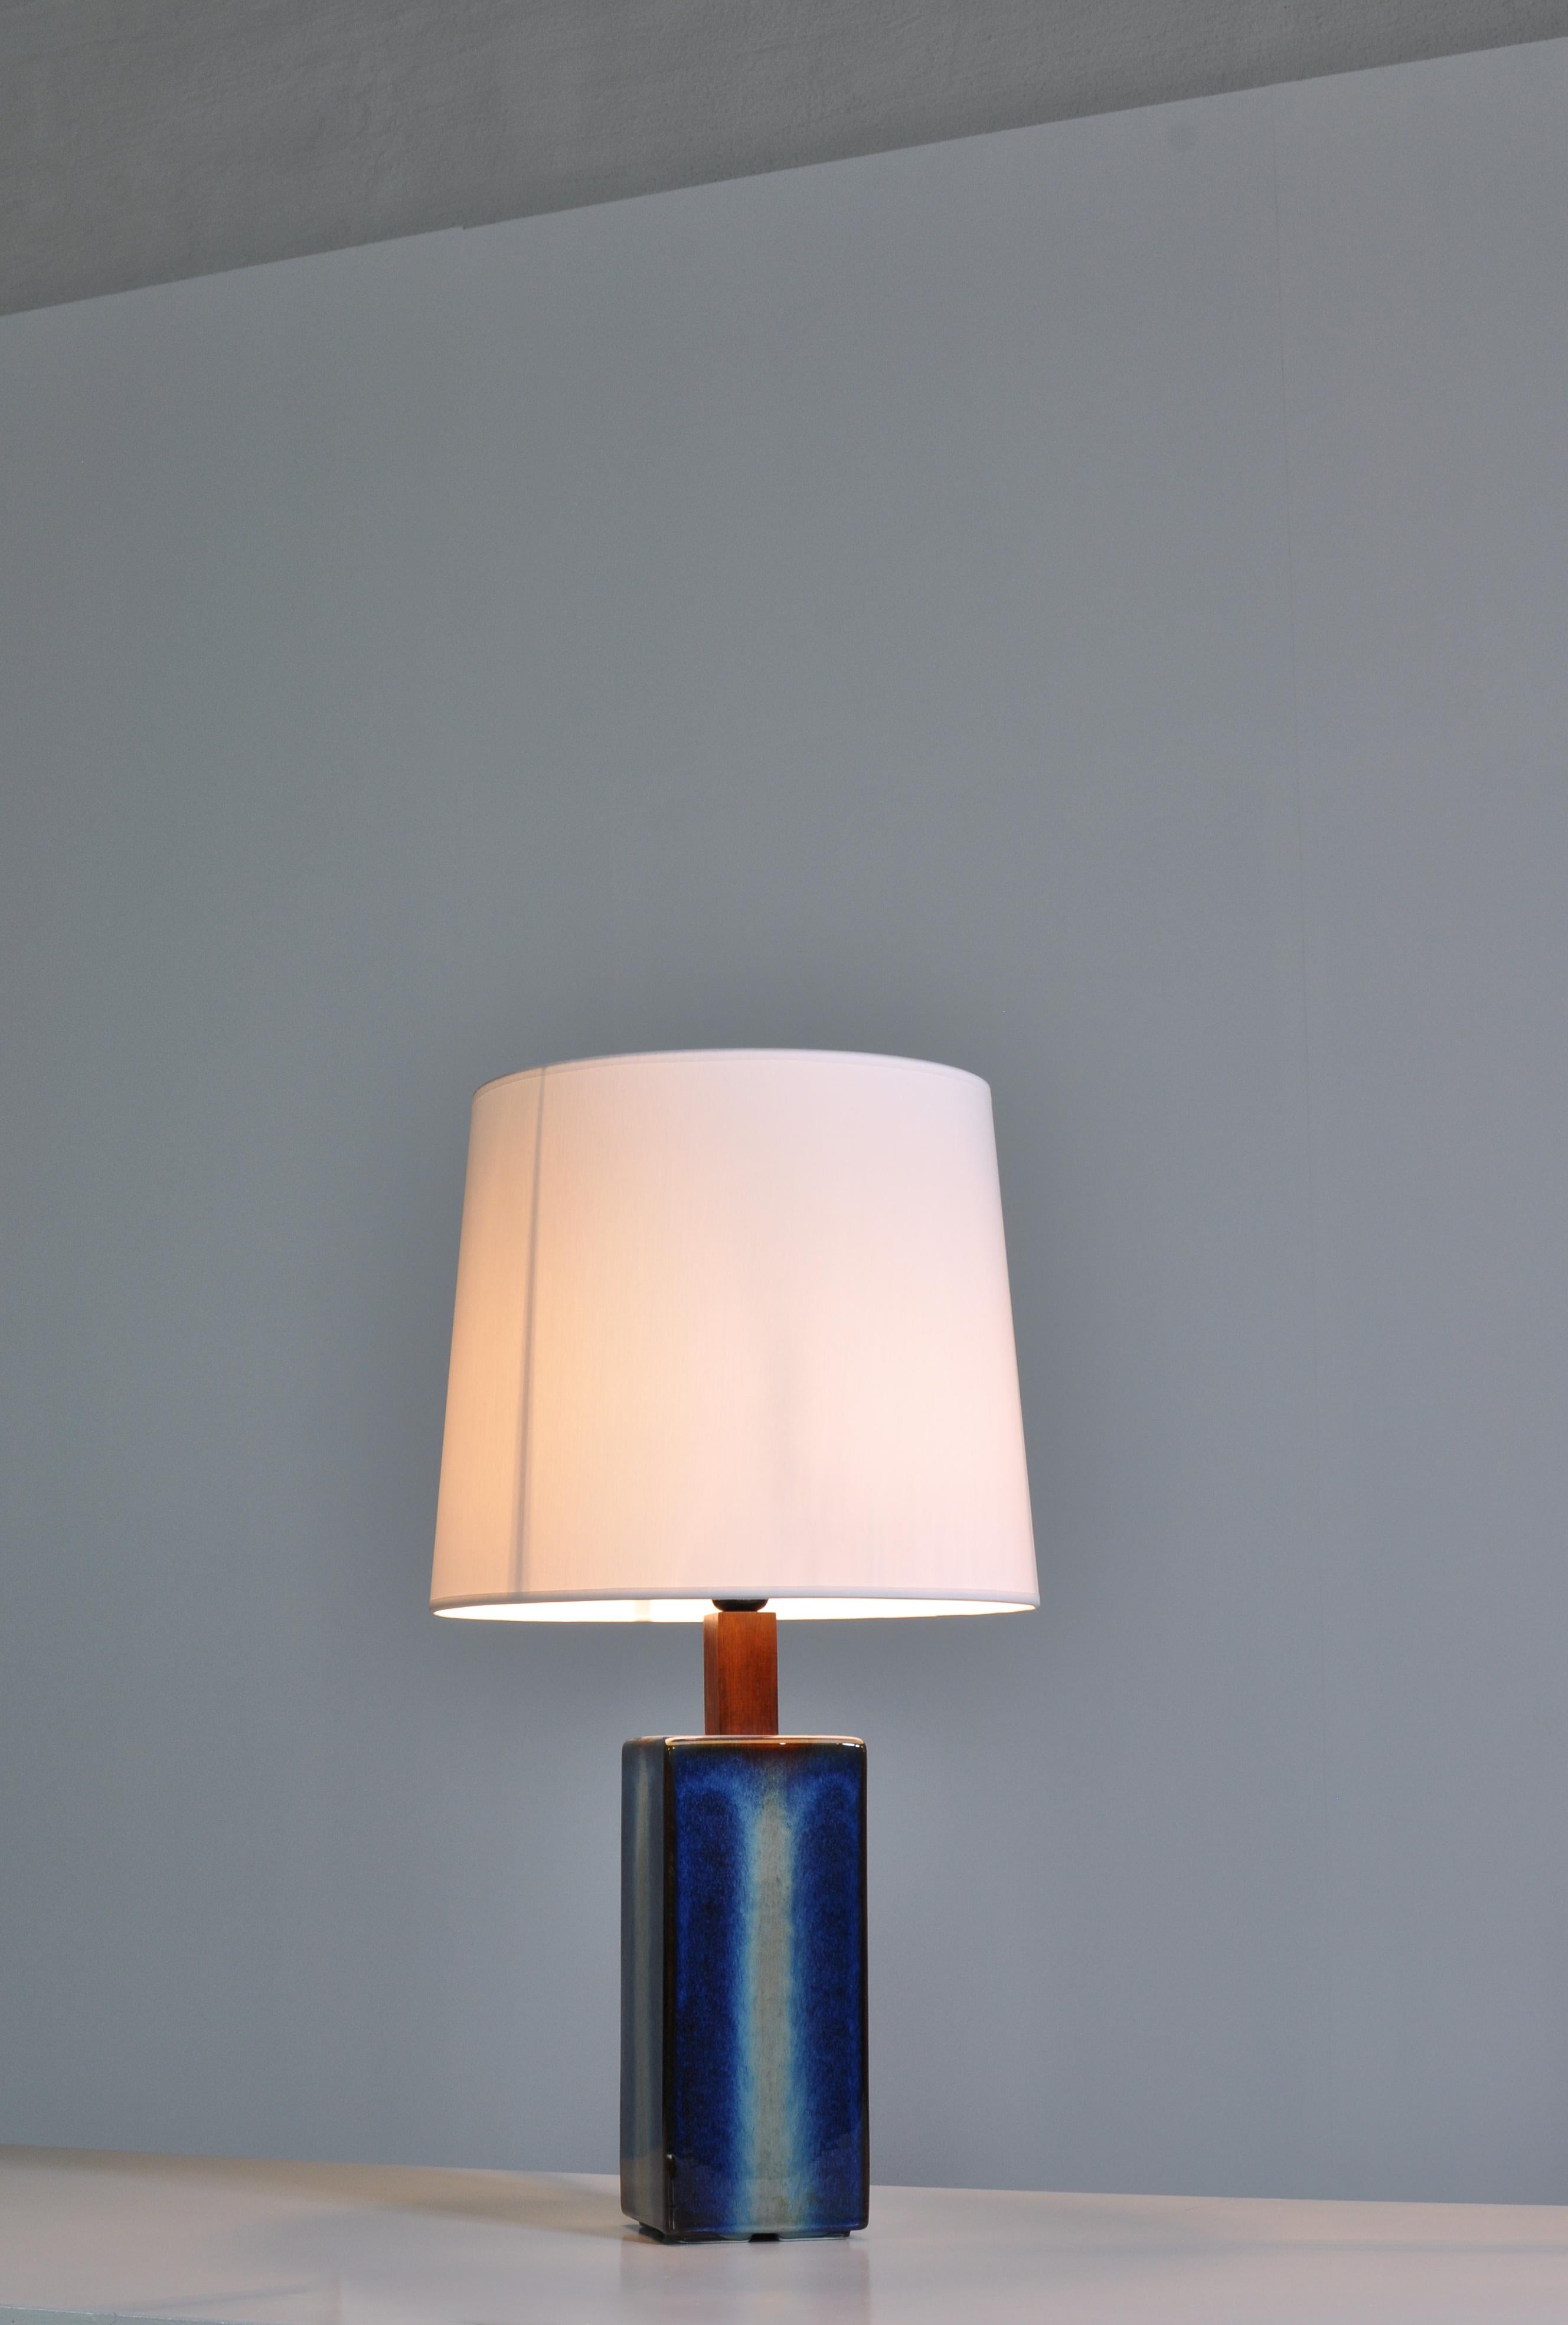 Mid-20th Century Danish Modern Pair of Large Blue Table Lamps from Søholm Stoneware, 1960s